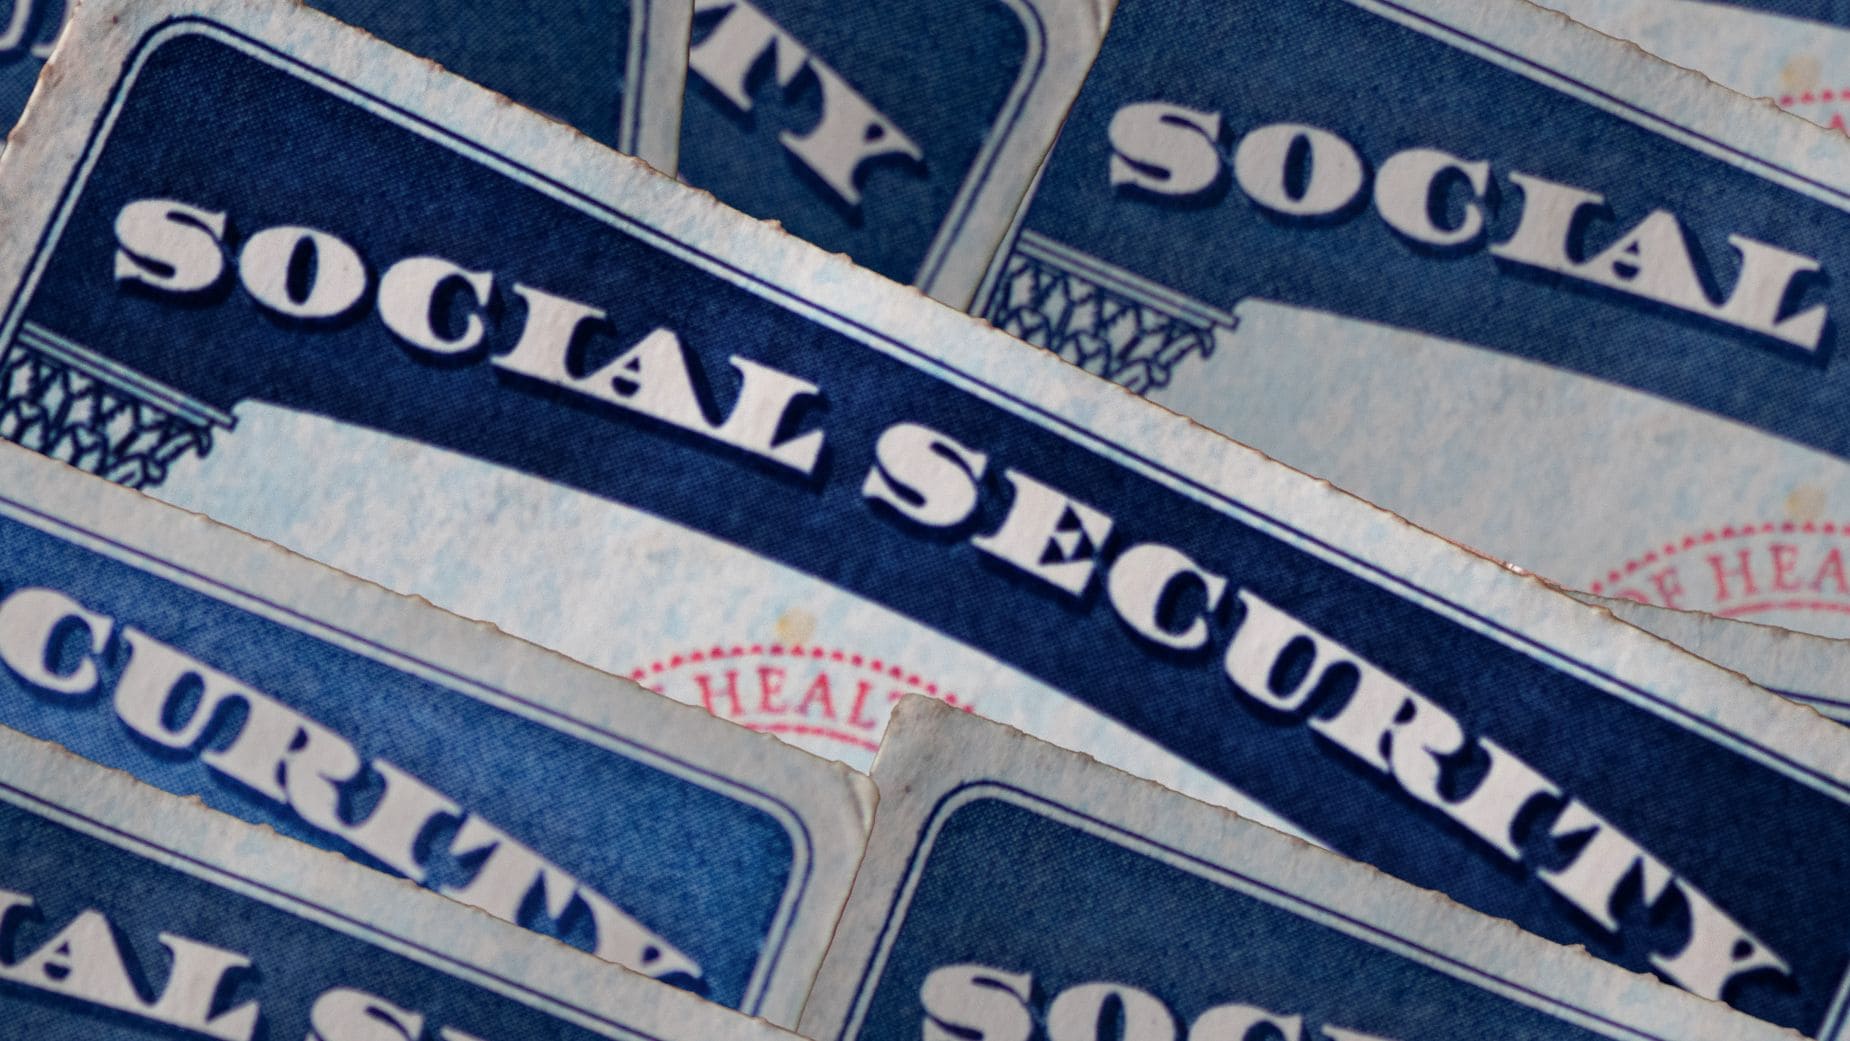 Social Security is sending the new check today just to a specific group of americans